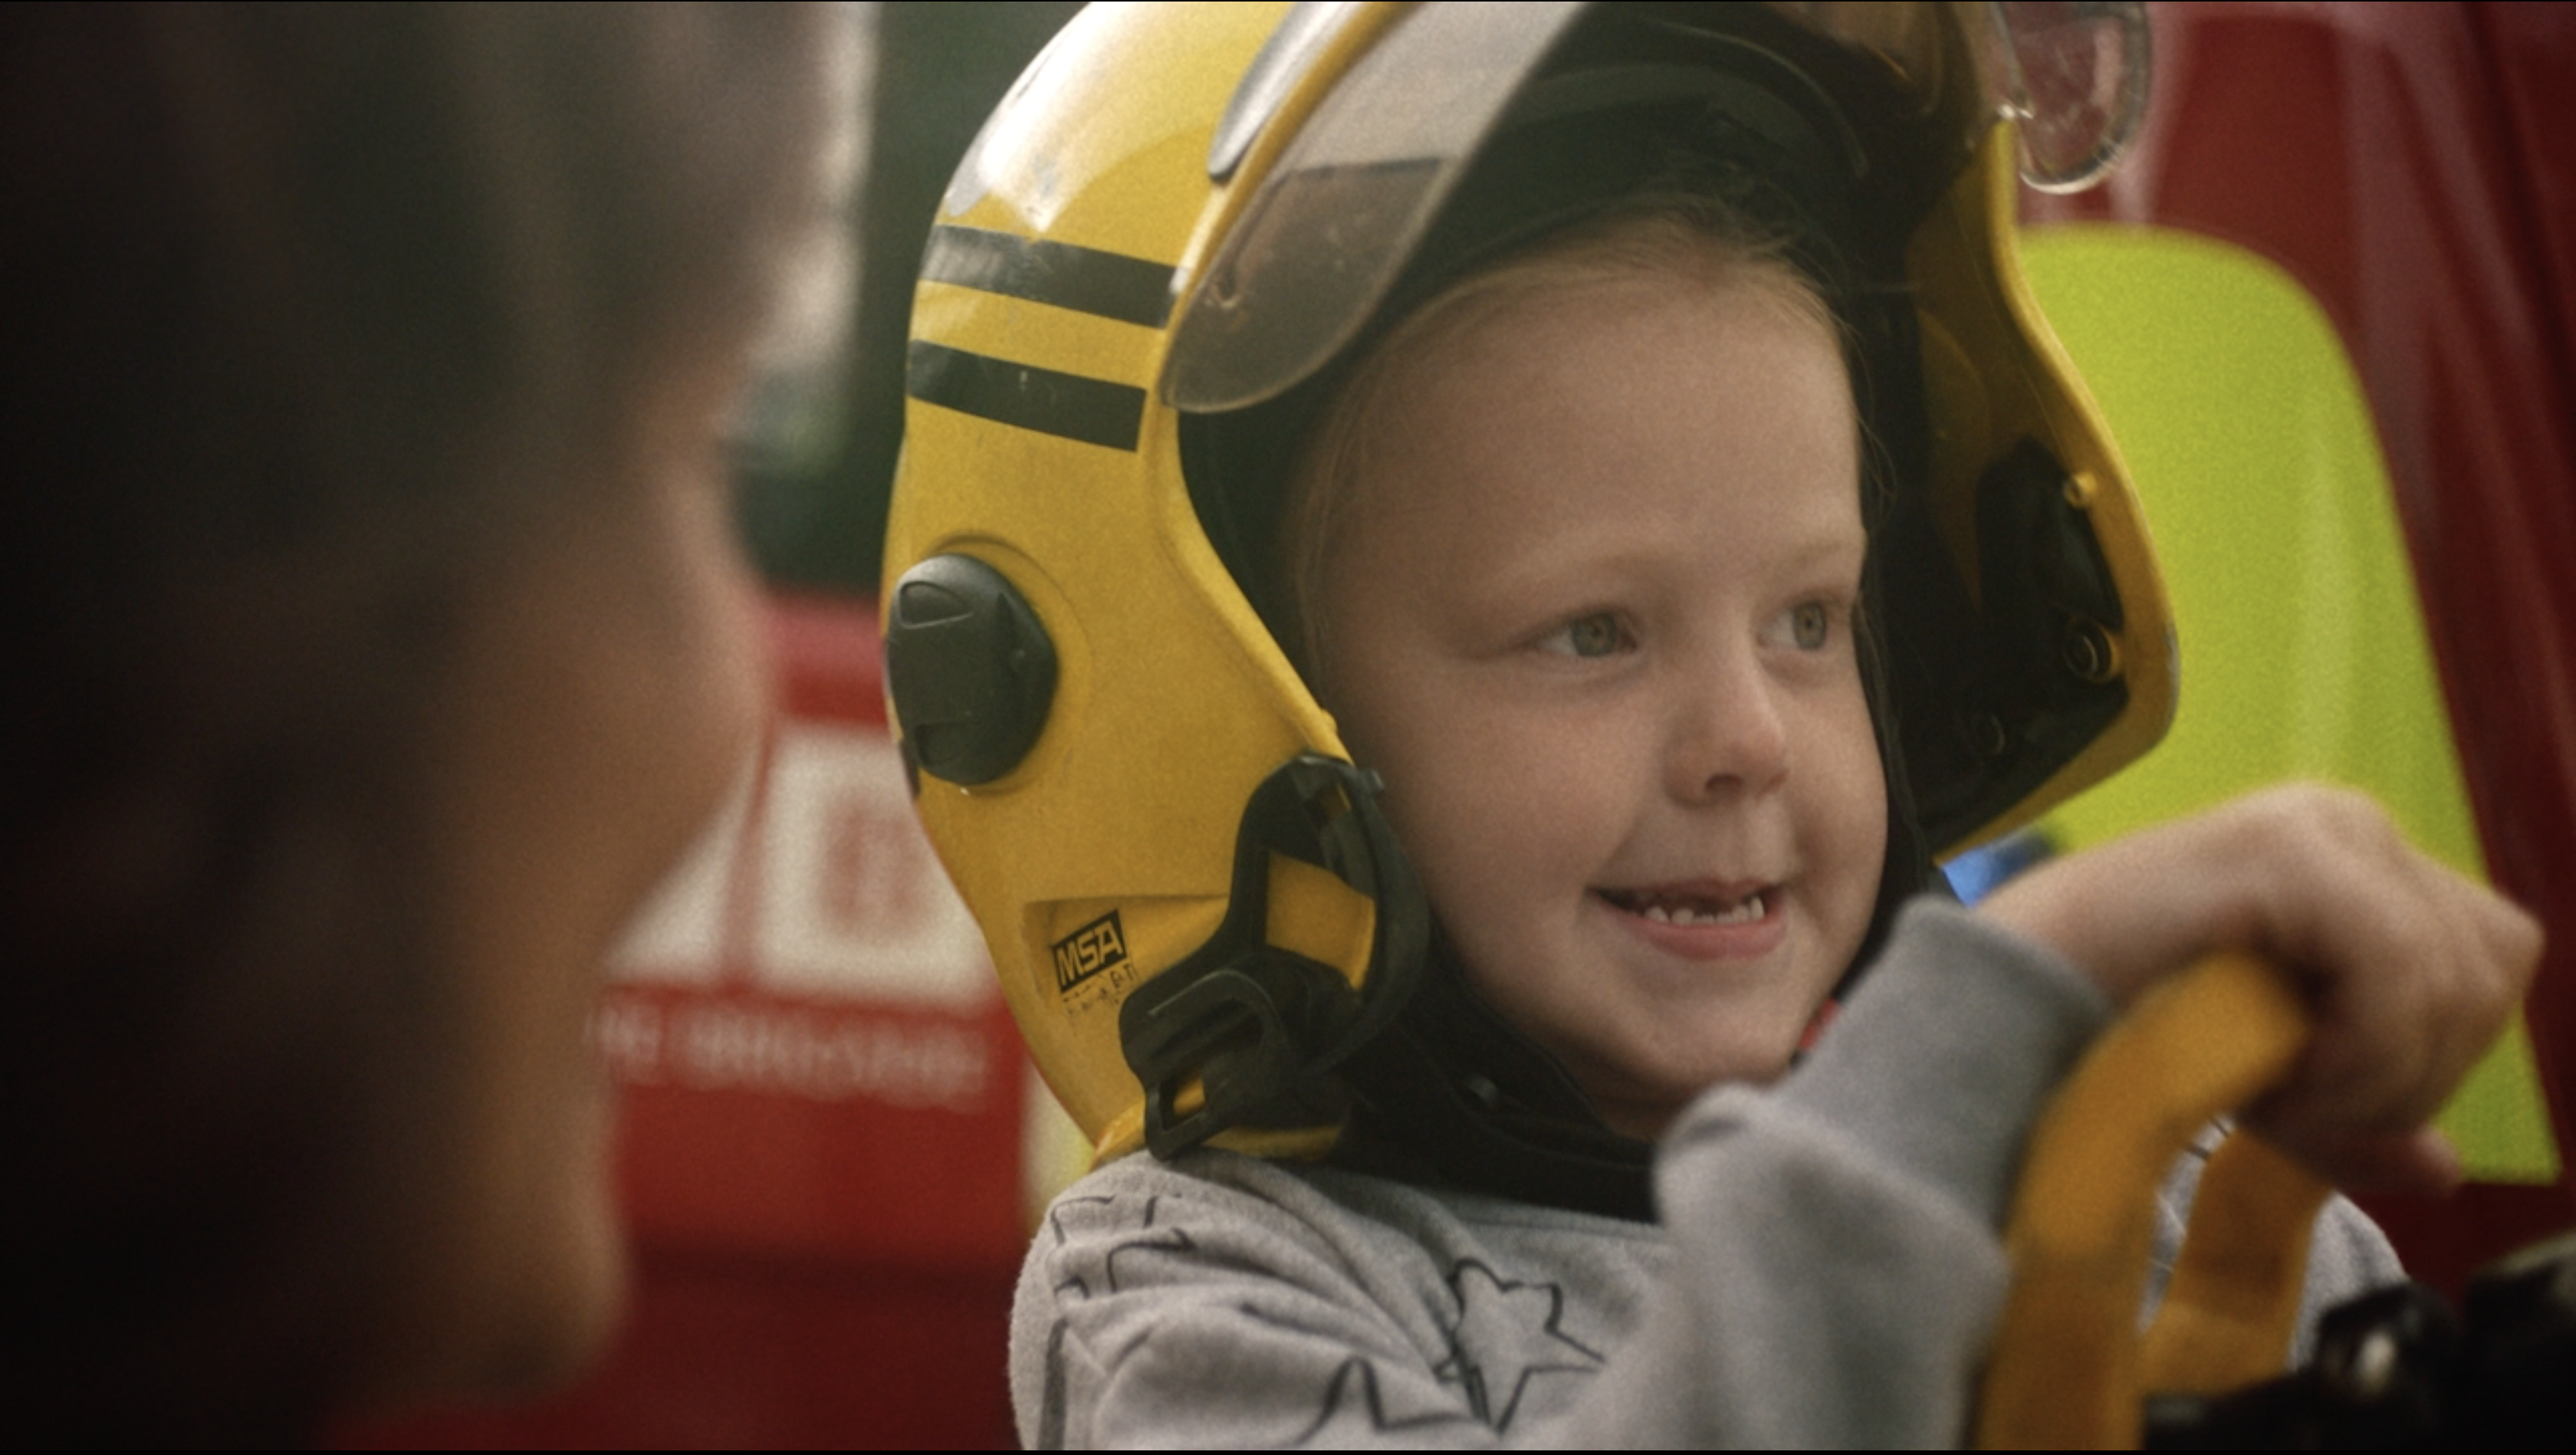 LFB Recruitment Film Shows There's More to Firefighting Than You Think